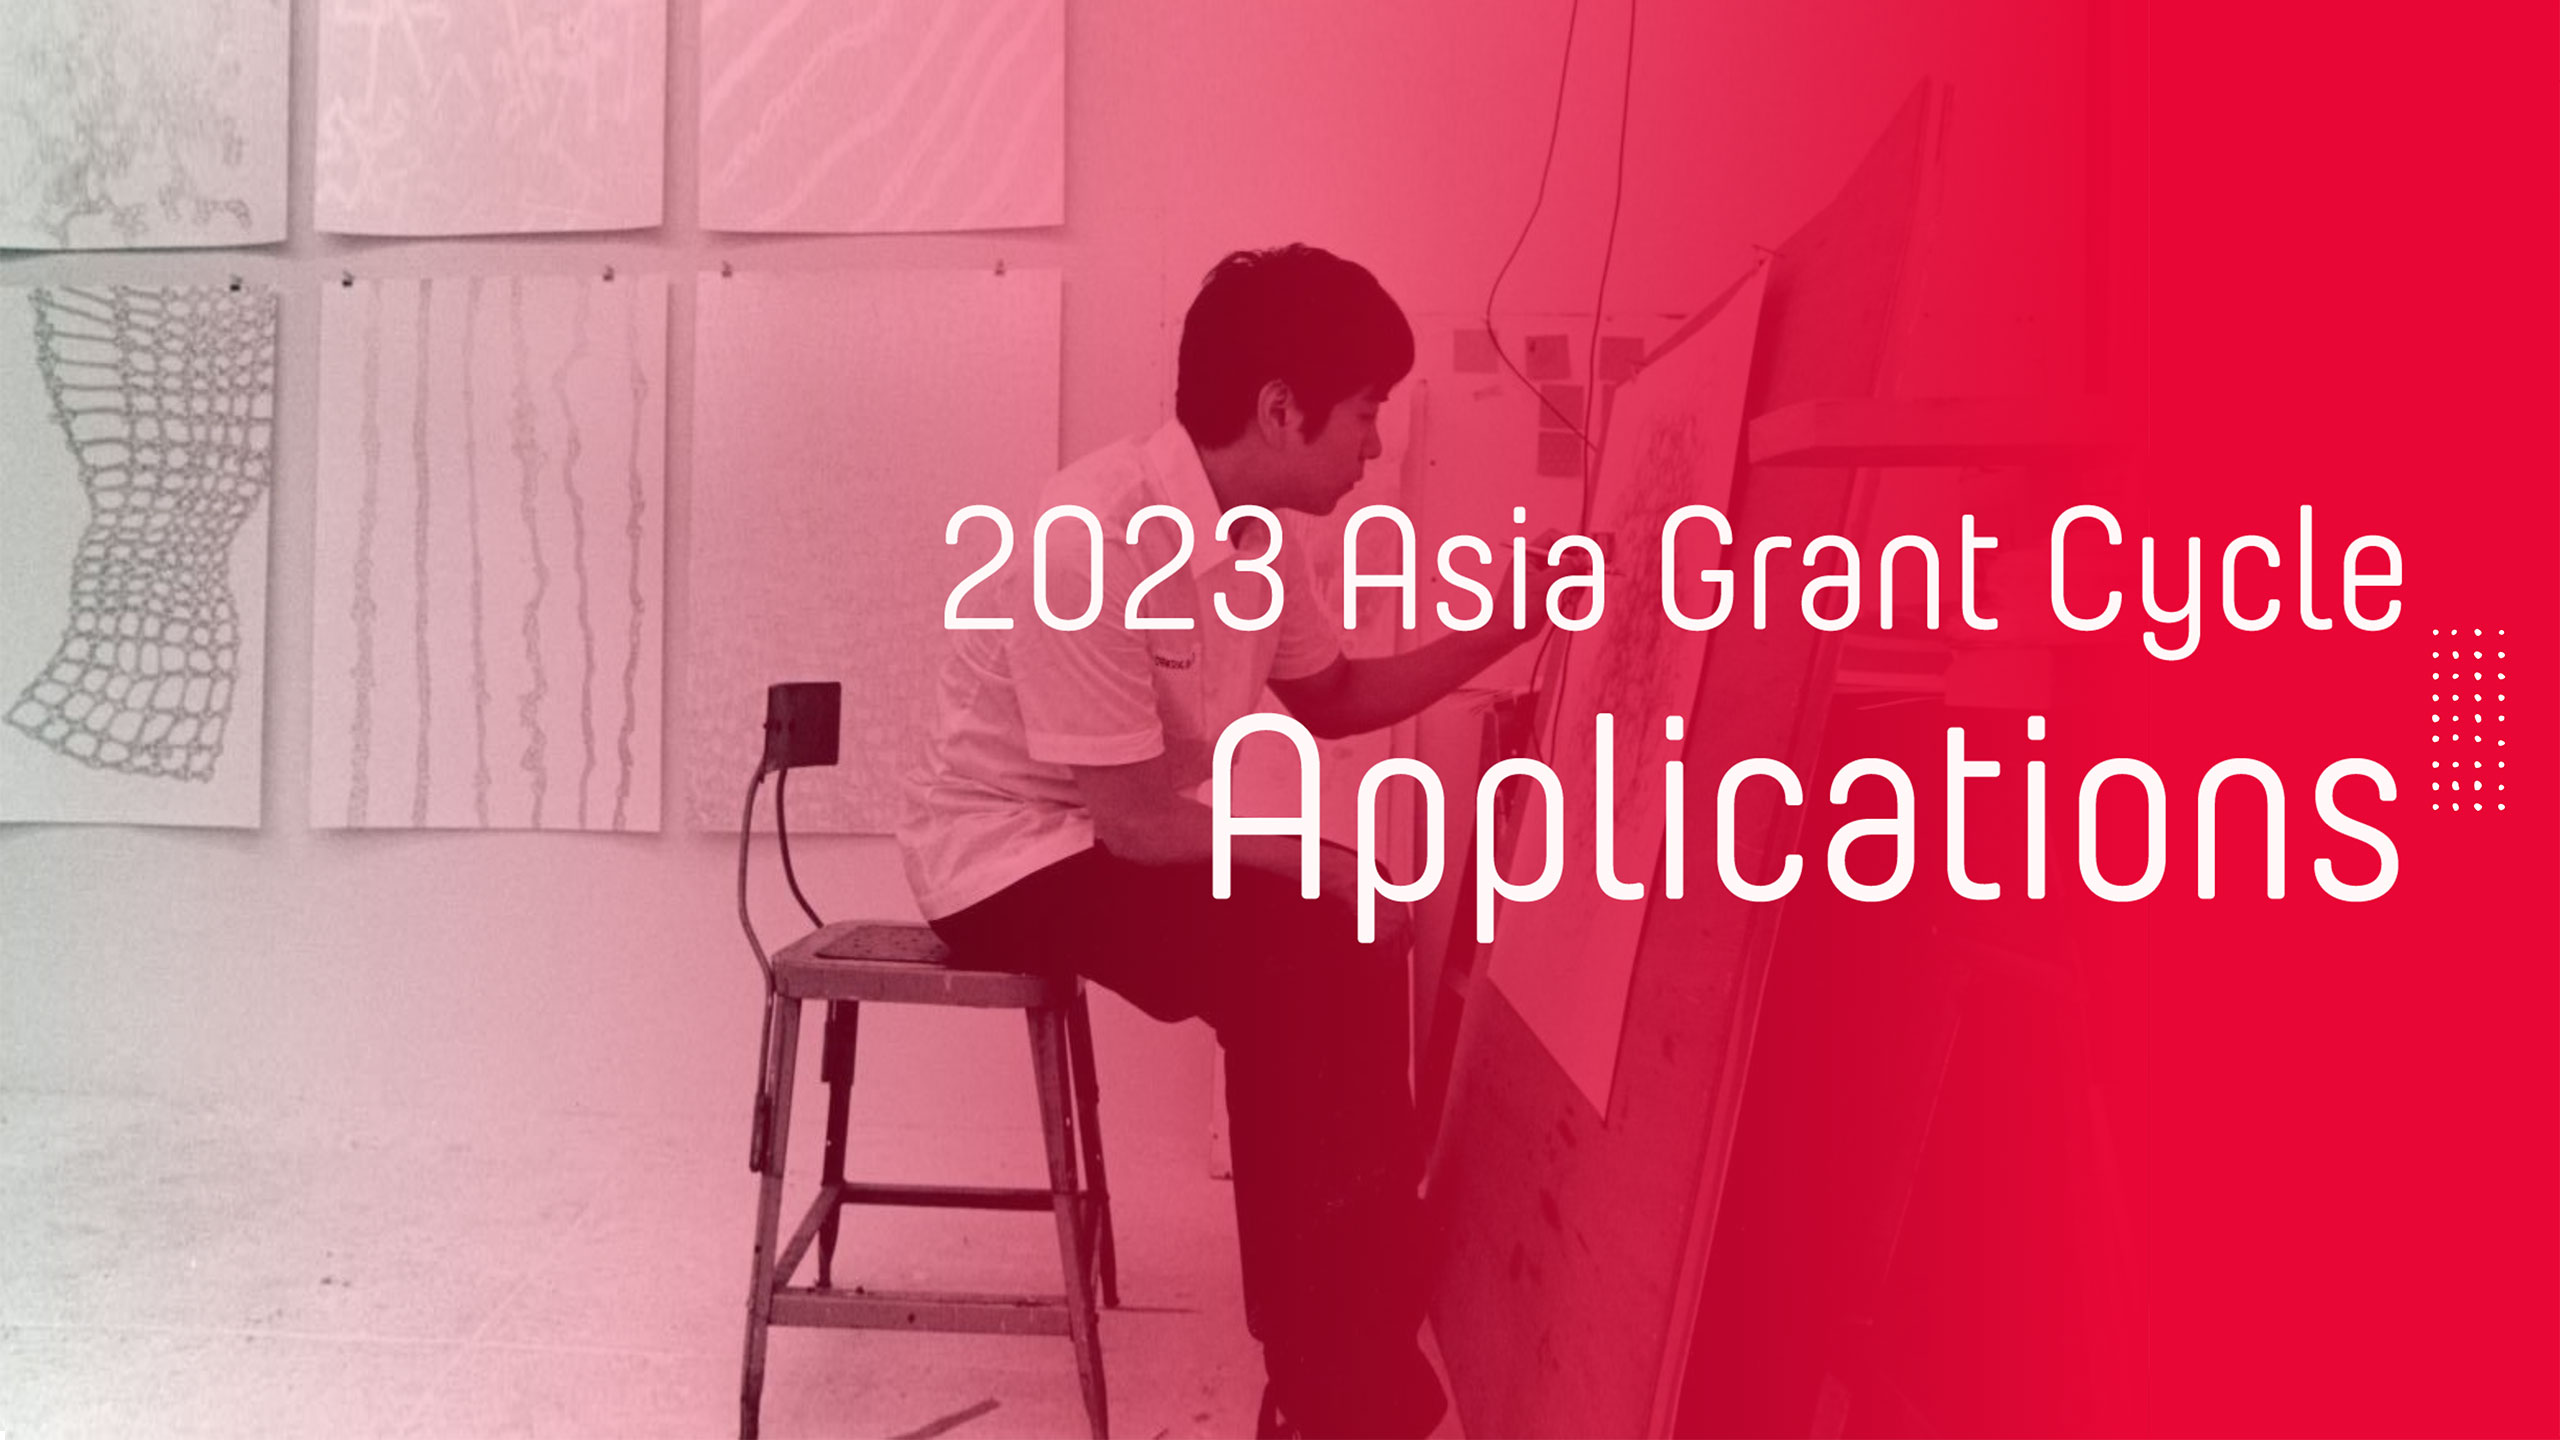 2023 Asia Grant Cycle Applications